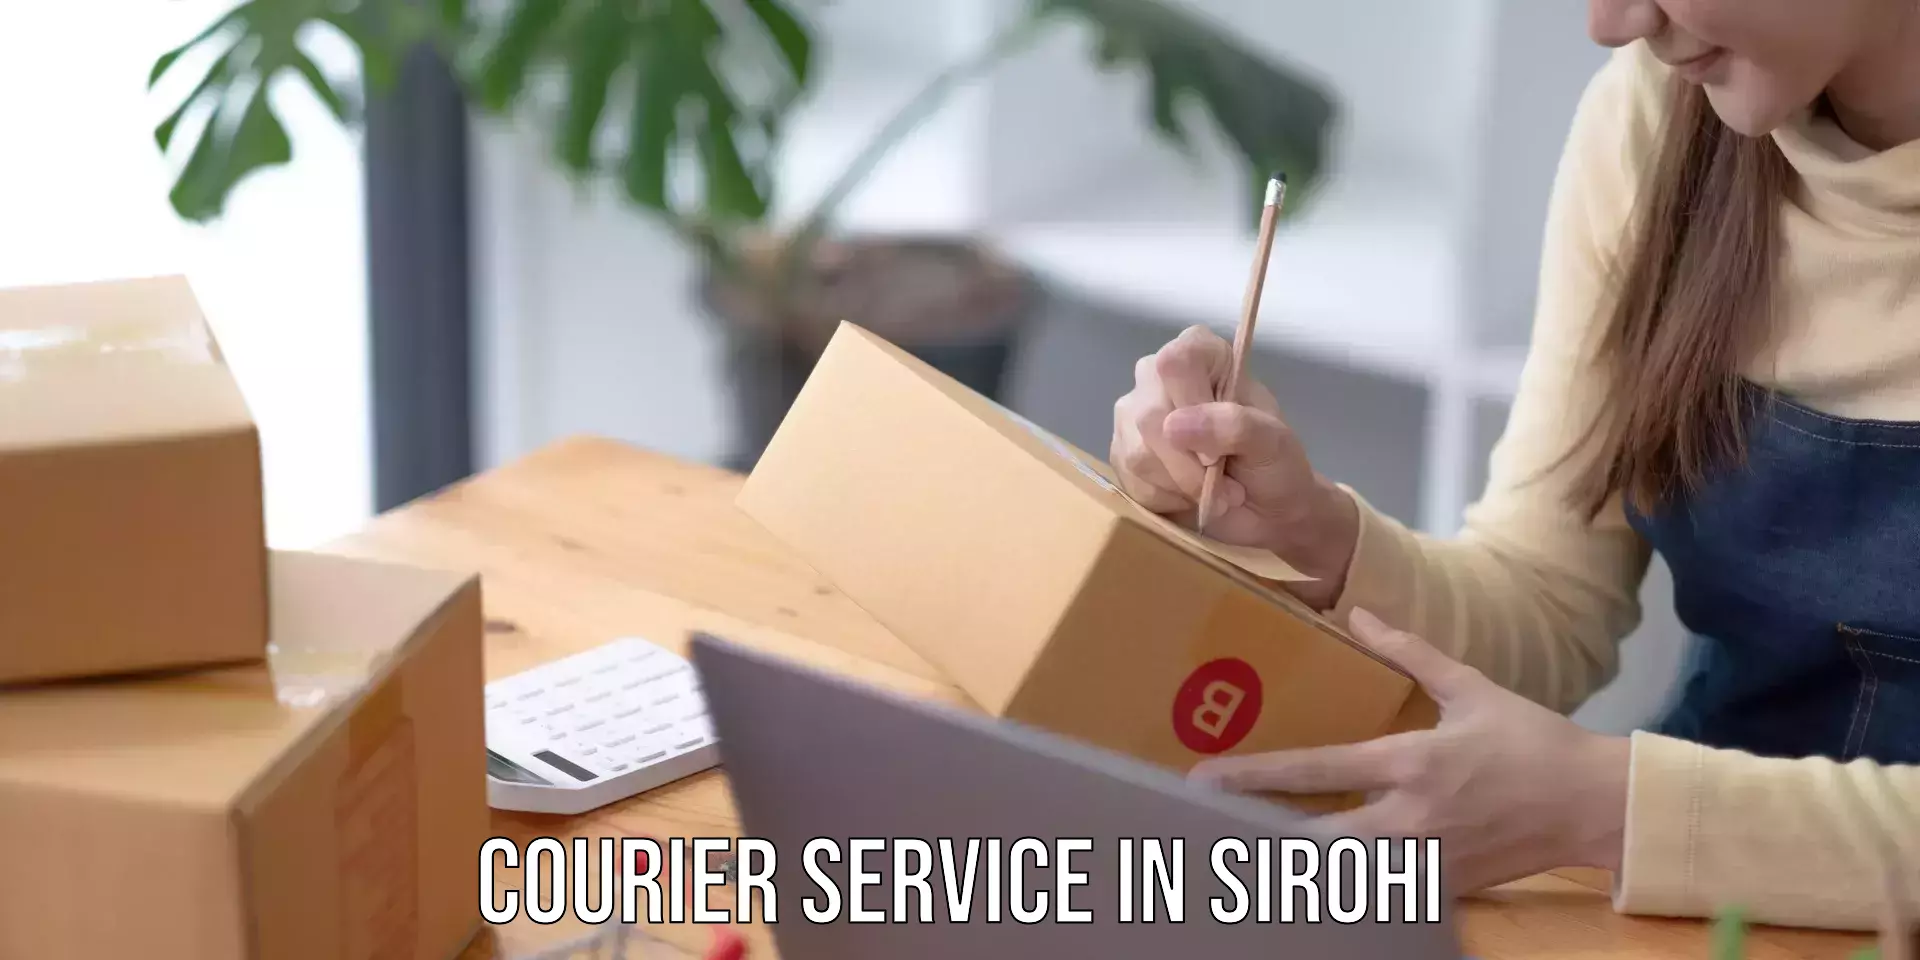 Residential courier service in Sirohi